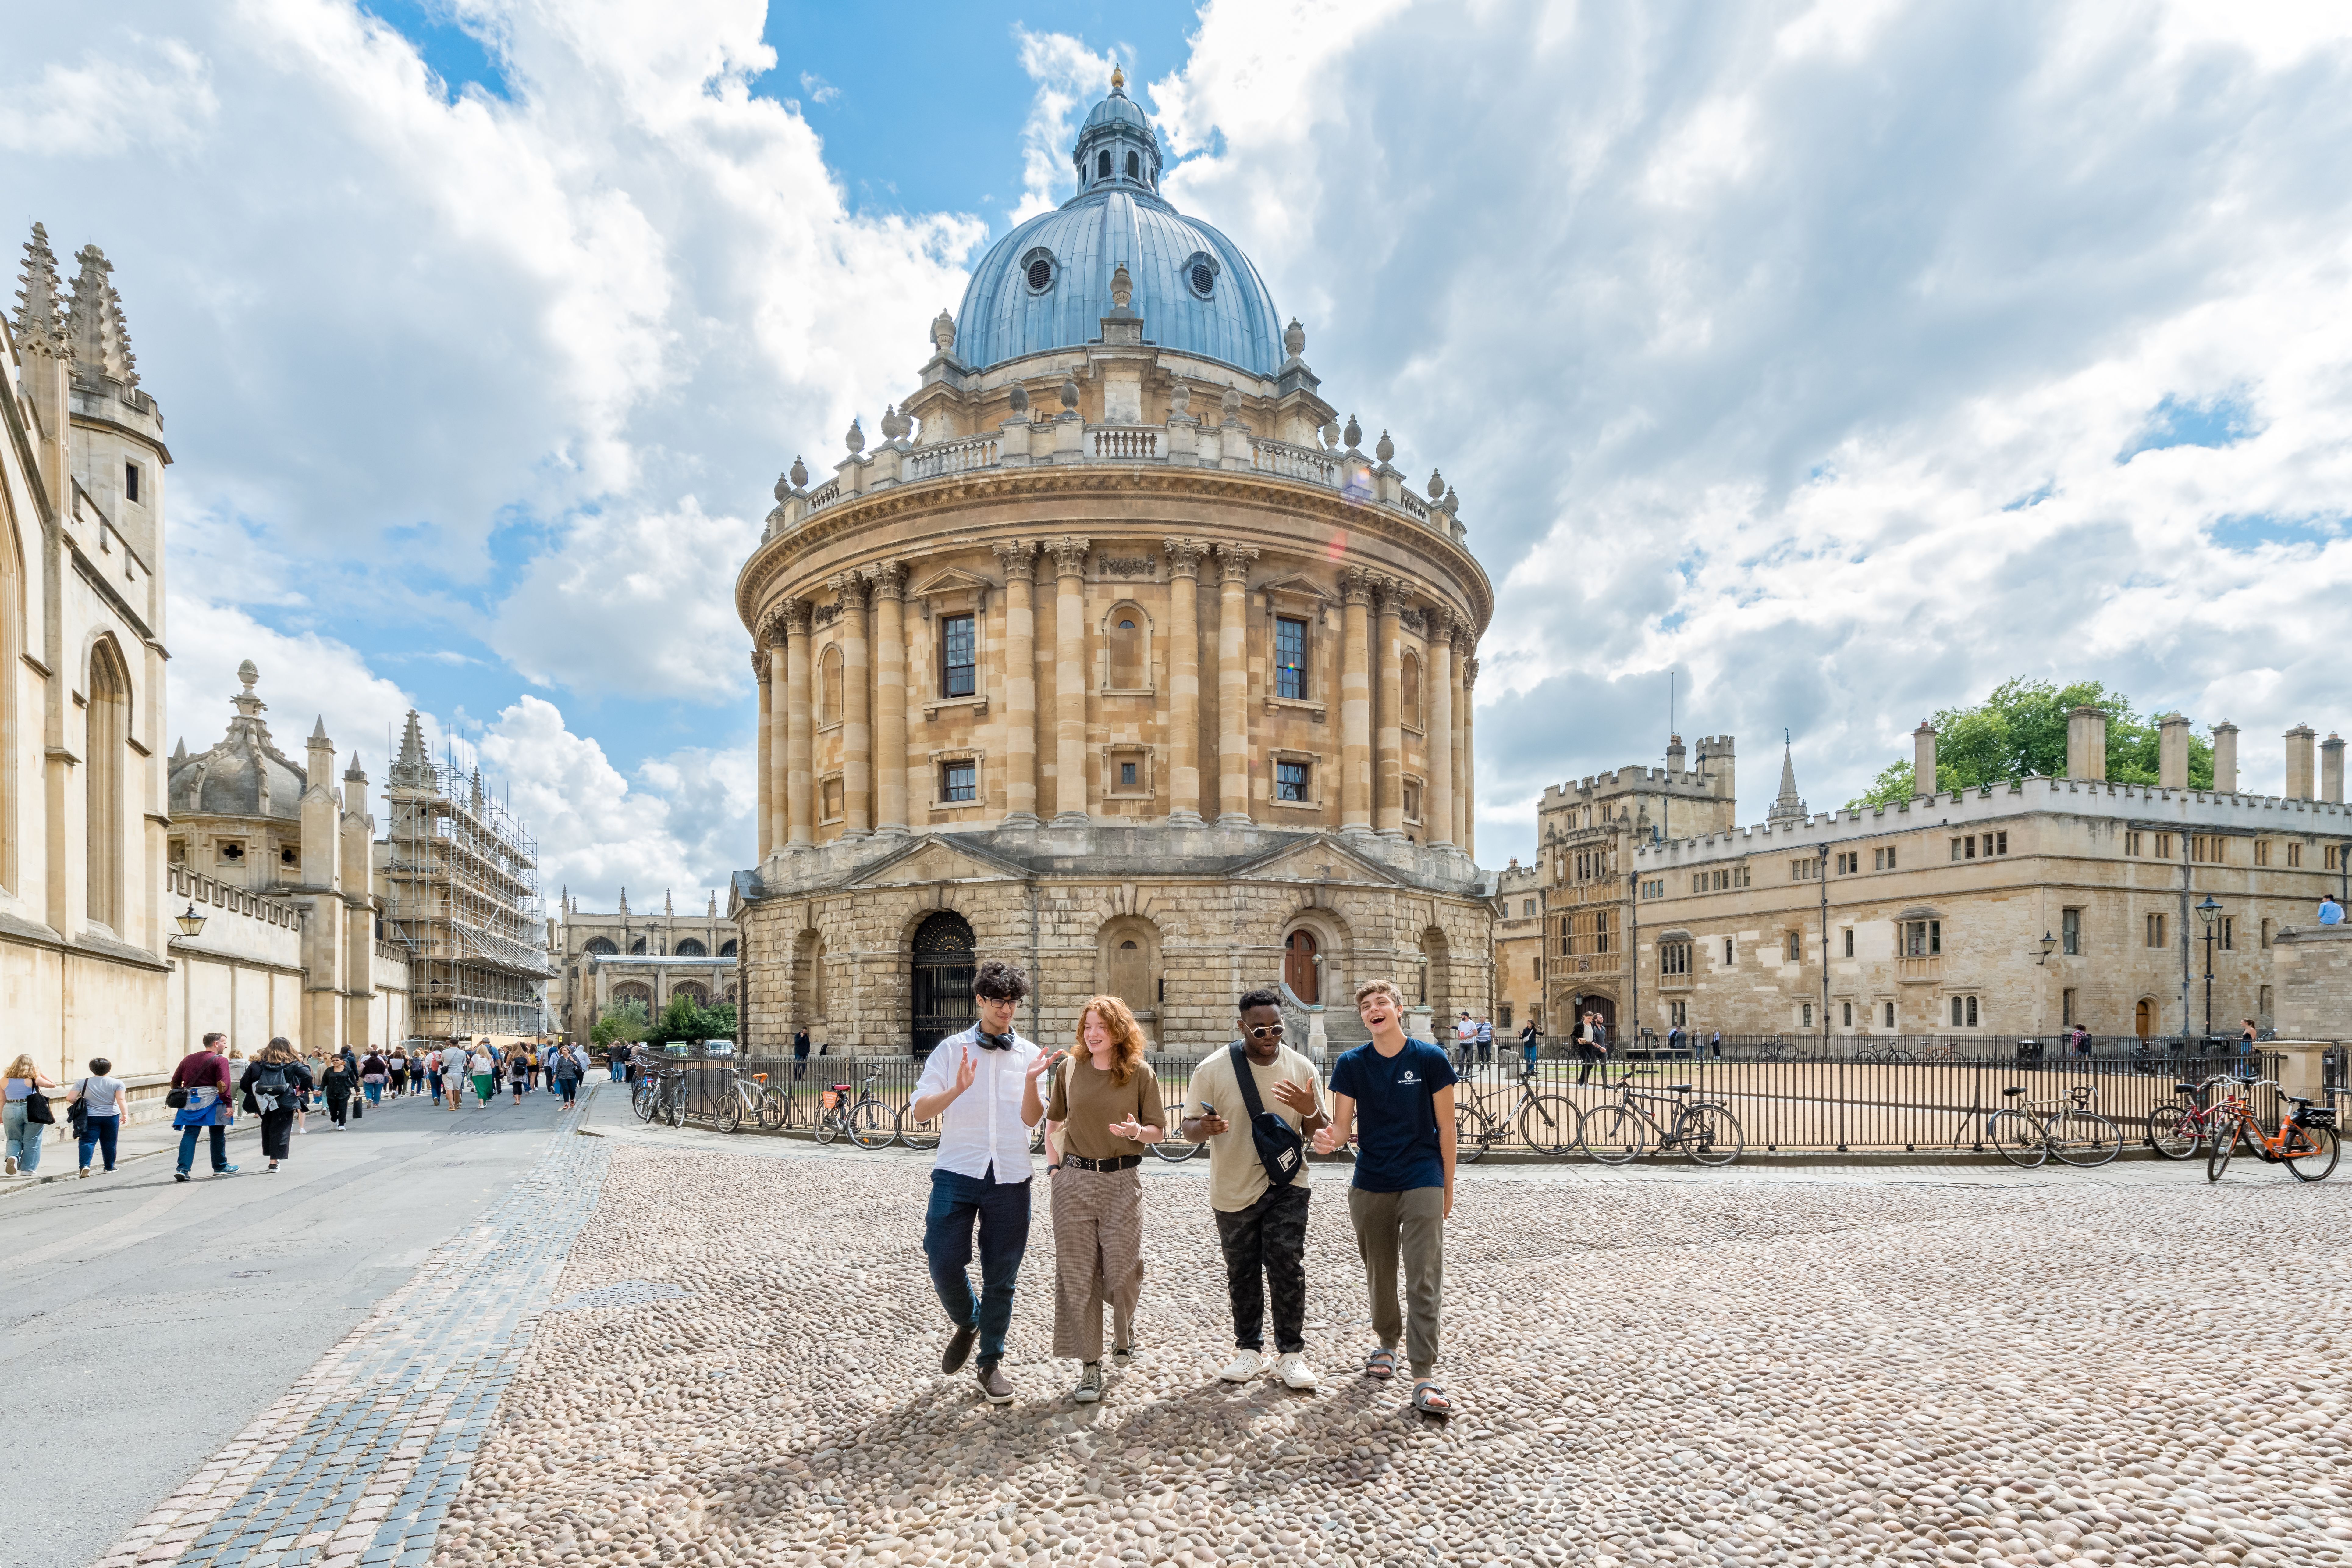 A group of summer school students studying abroad in Oxford